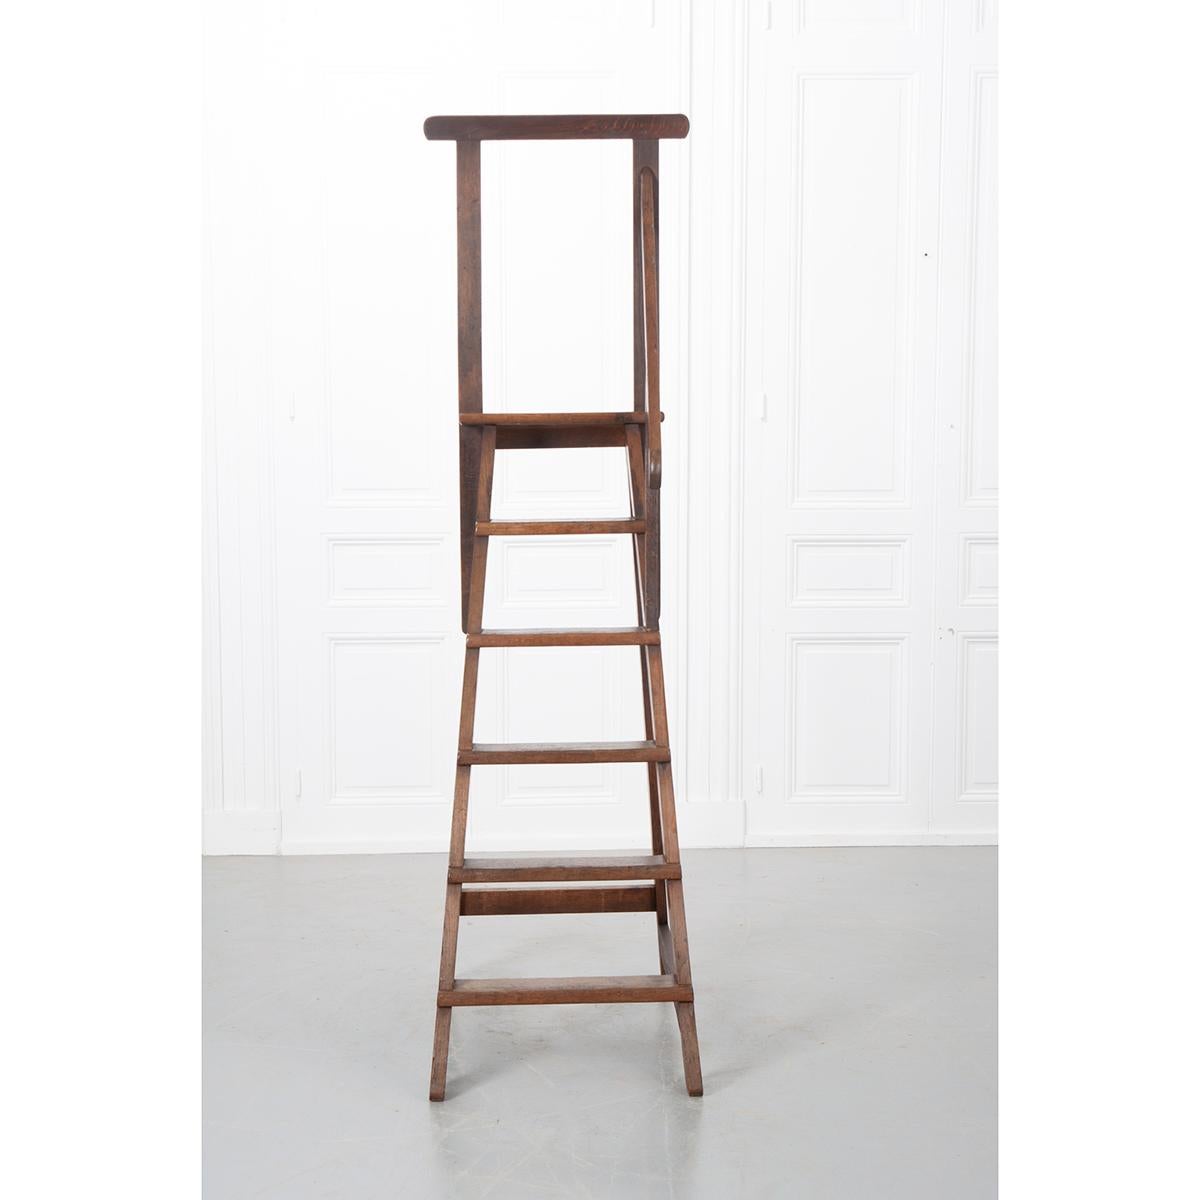 This simple yet sturdy French chestnut library step would be a fantastic addition to your home. It features a single handrail on the right side of the ladder and a small landing, will allow for safe access of books and other out-of-reach items with